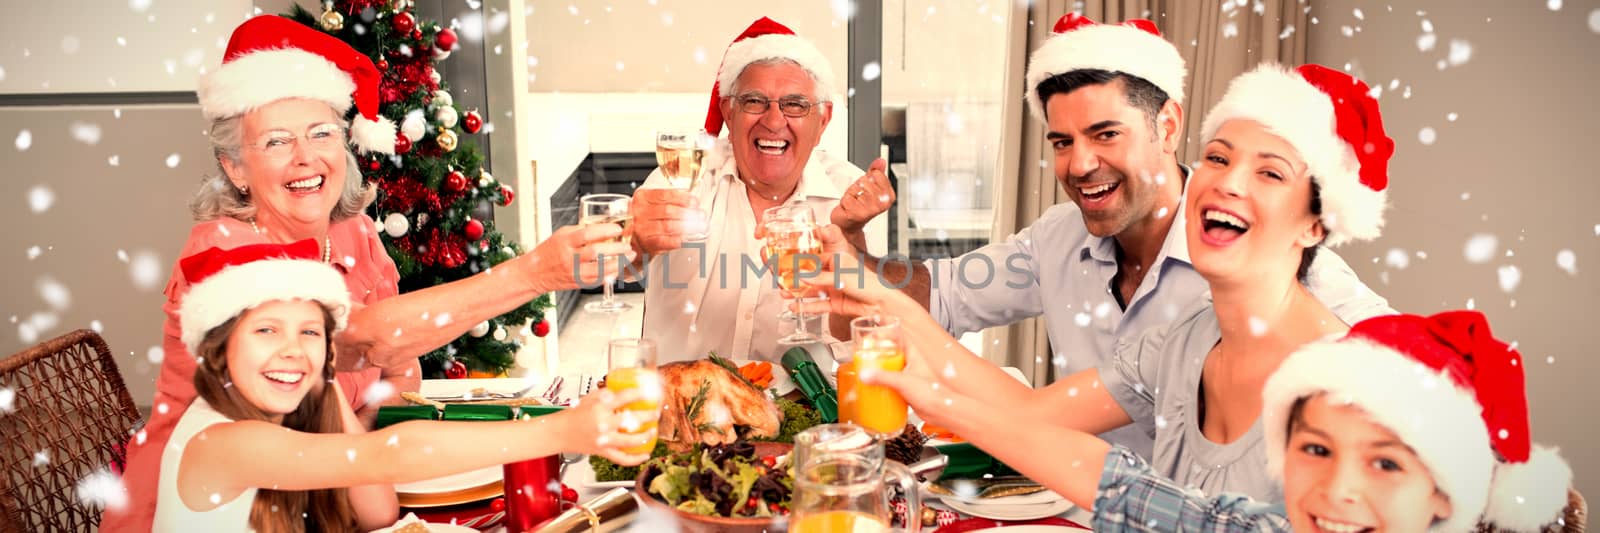 Family in santas hats toasting wine glasses at dining table against snow falling